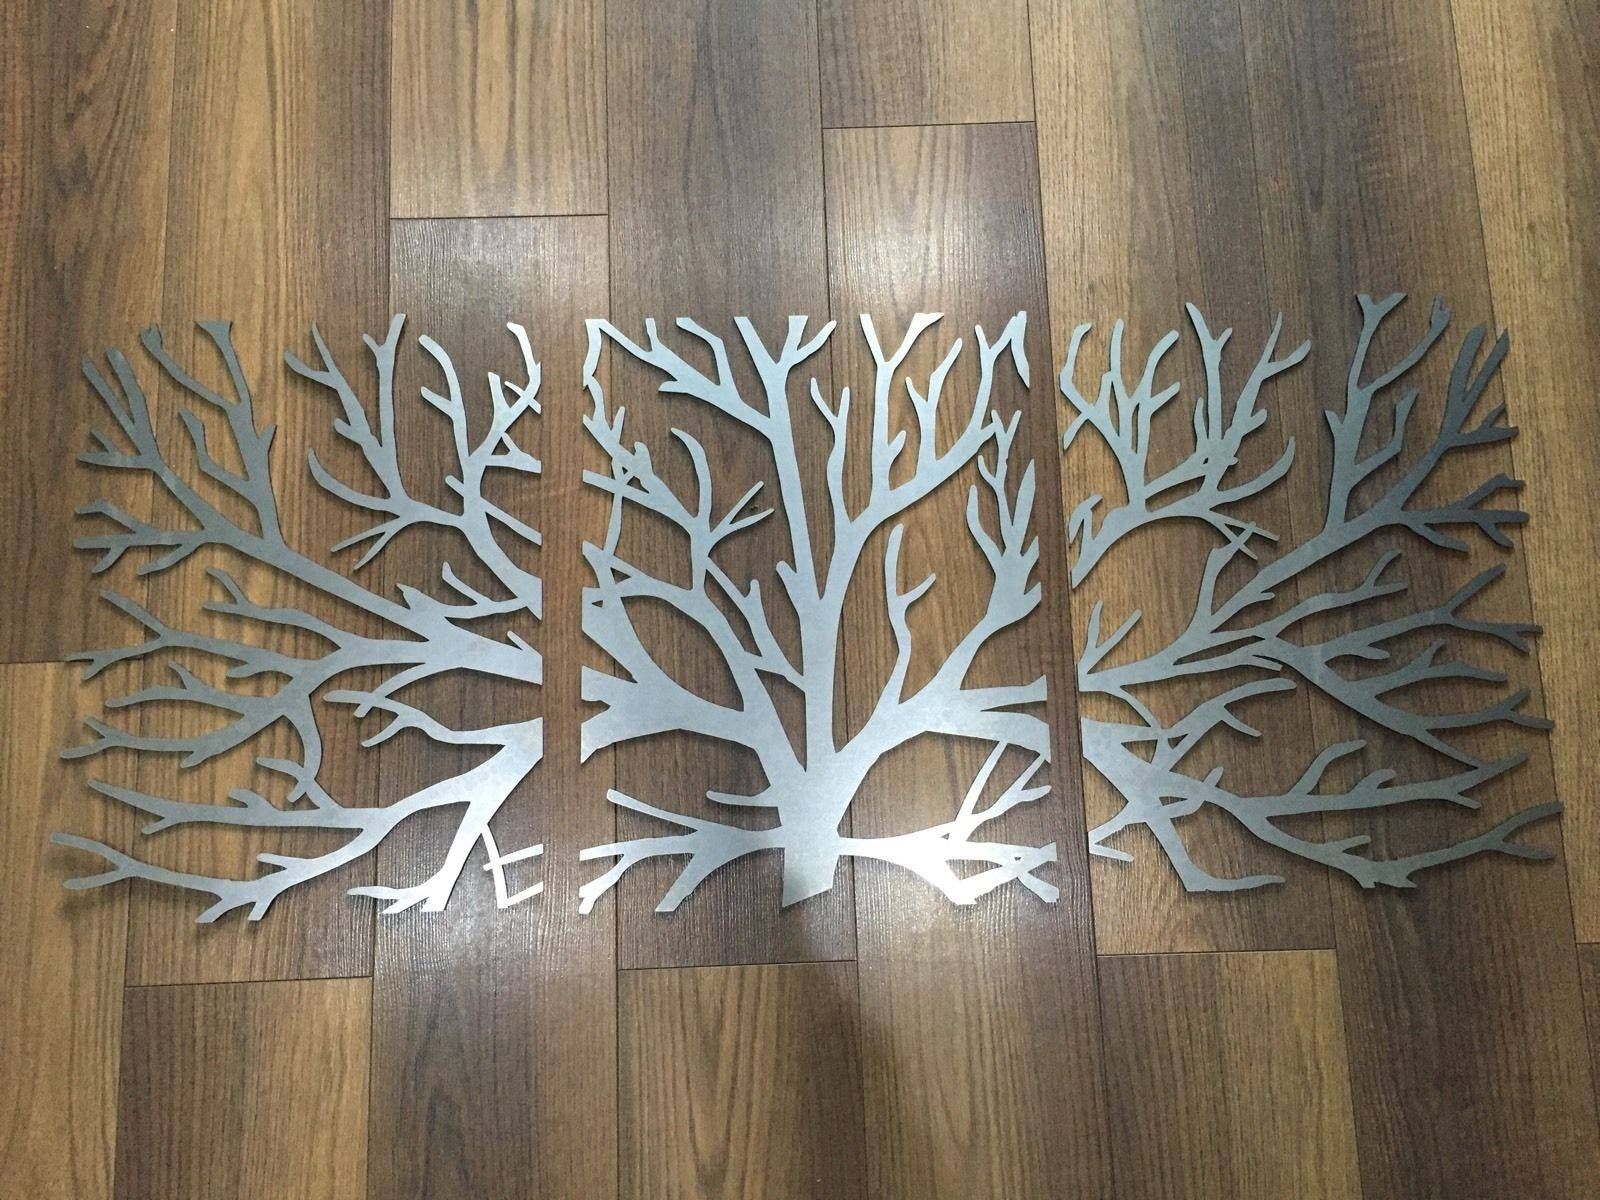 Wall Art Designs: Metal Wall Art Decor And Sculptures Wooden Metal In Best And Newest 3d Metal Wall Art Sculptures (View 2 of 20)